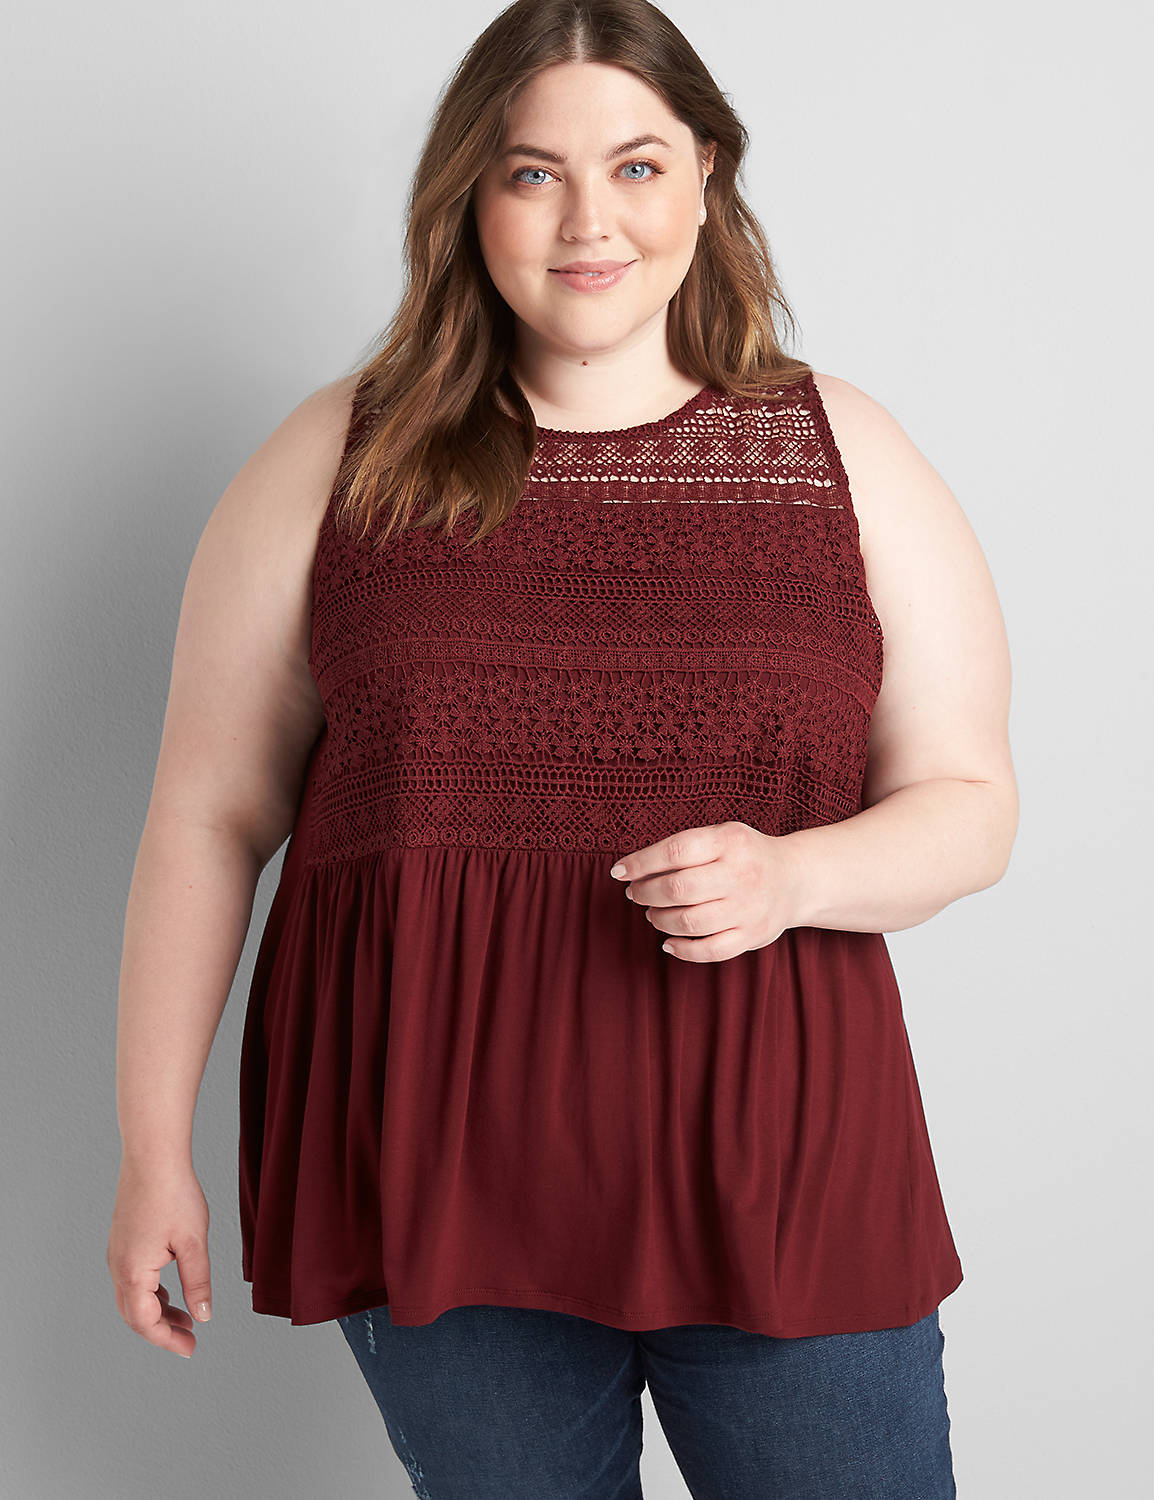 Crew-Neck Swing Tank With Lace Overlay Product Image 1